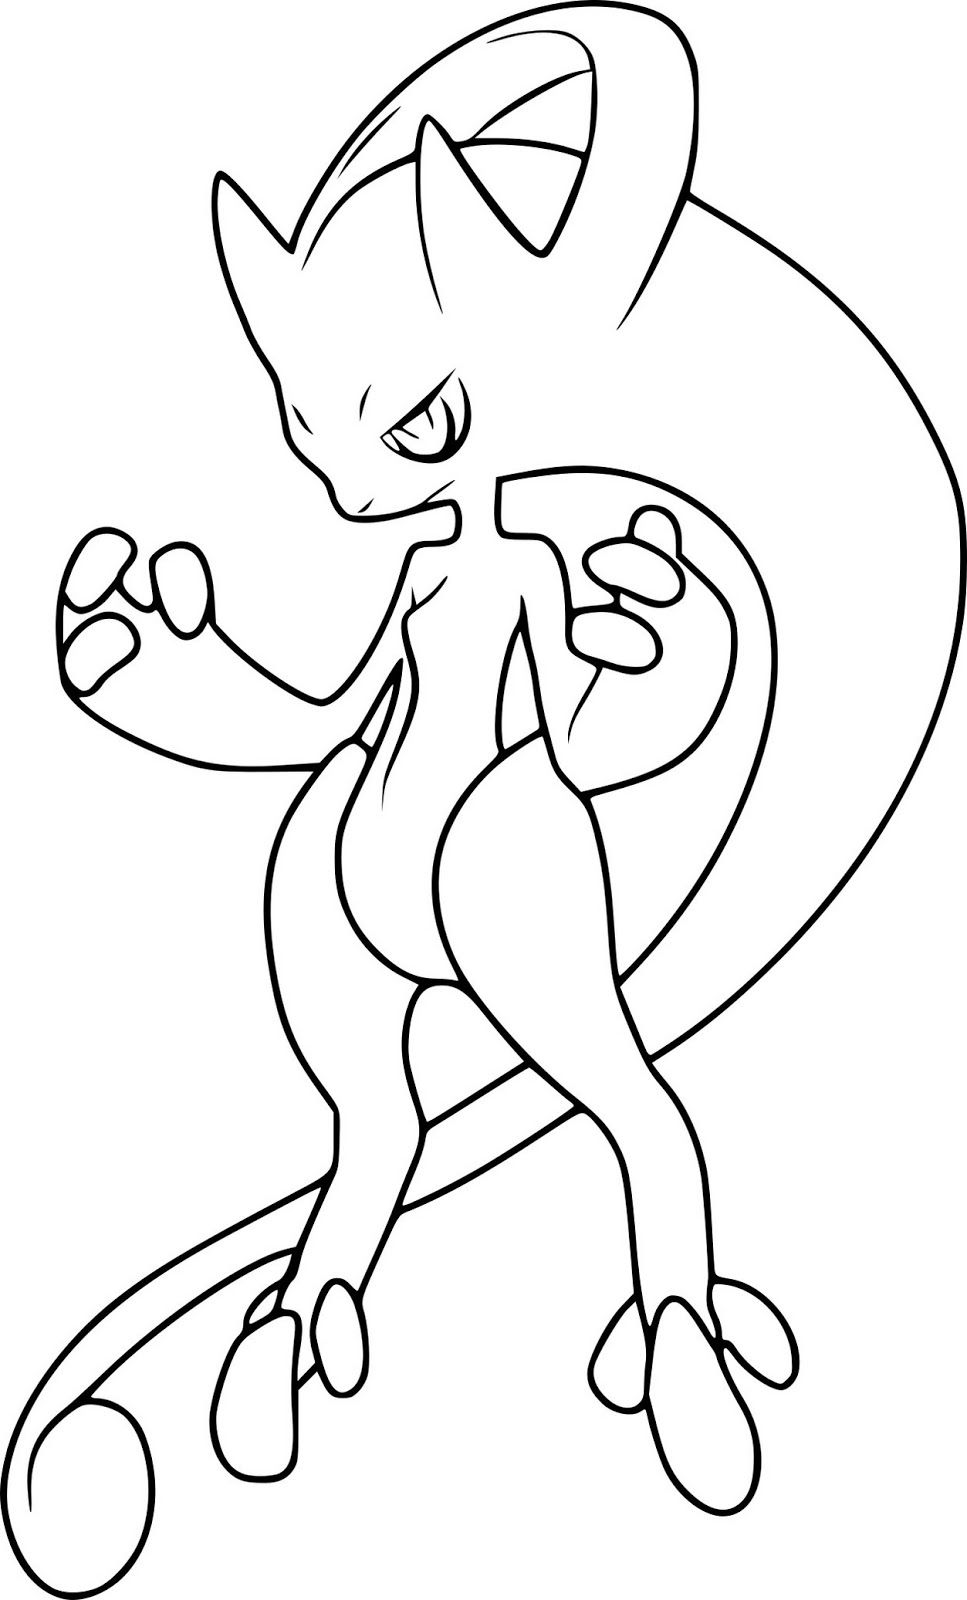 Mega Mewtwo Y Coloring Page in 2020 | Pokemon coloring, Pokemon coloring  pages, Pokemon sketch